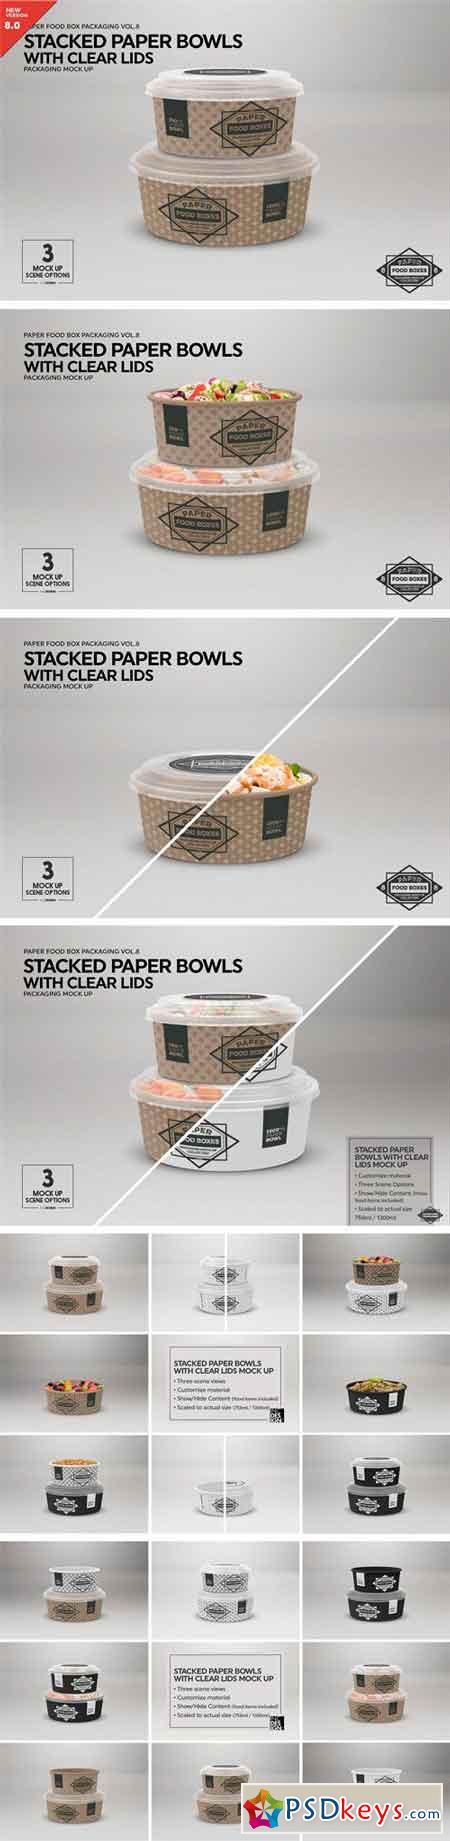 Stacked Paper Bowls Mock Up 2181789